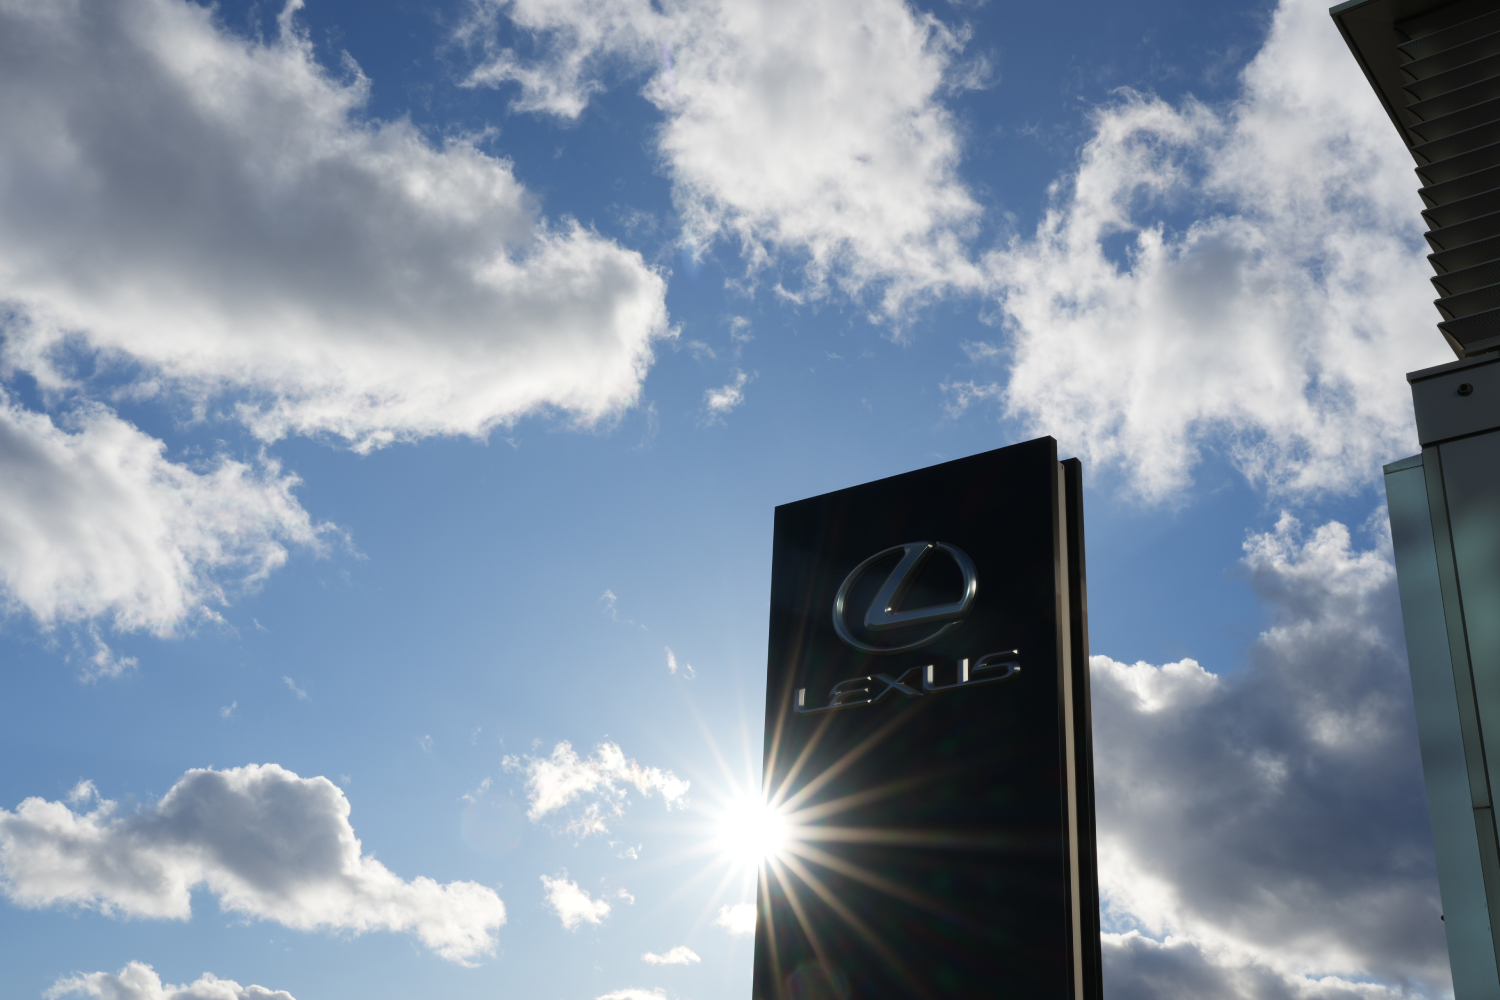 These brands offer the best dealership eting with Lexusxperience, star